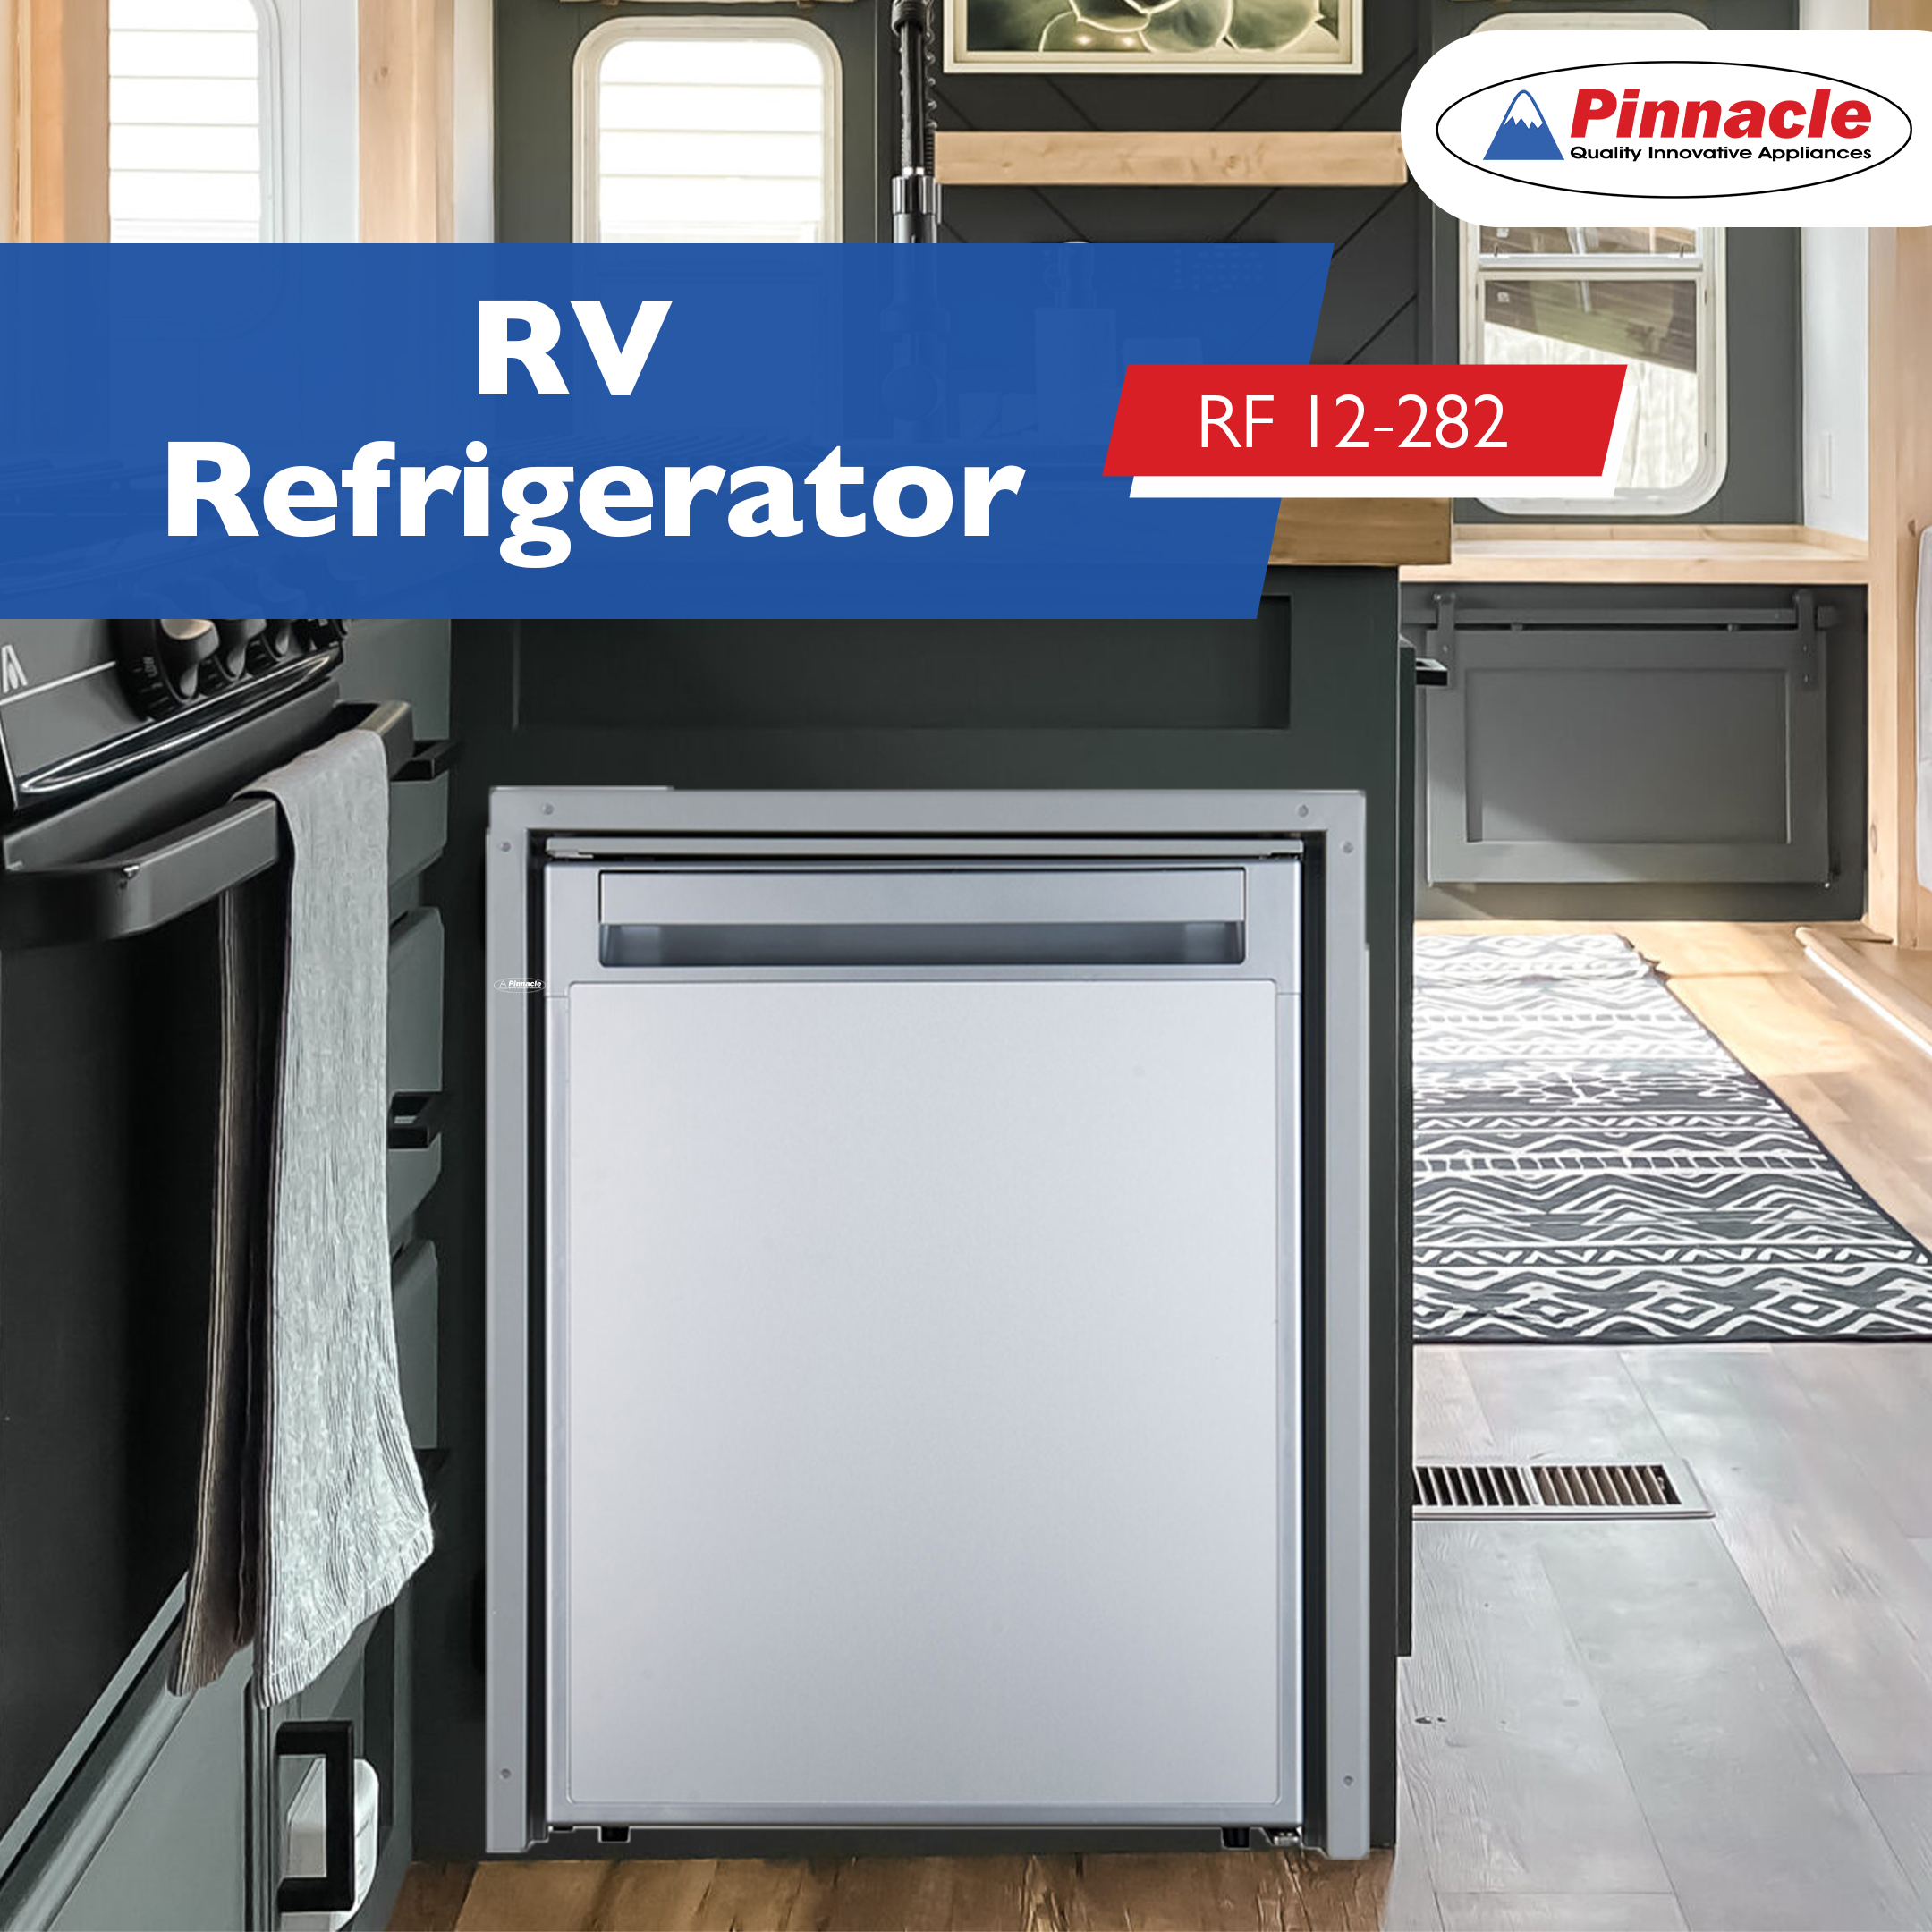 Pinnacle Announces Launch Of Sleek And Energy Efficient RV-Ready Compact Refrigerator